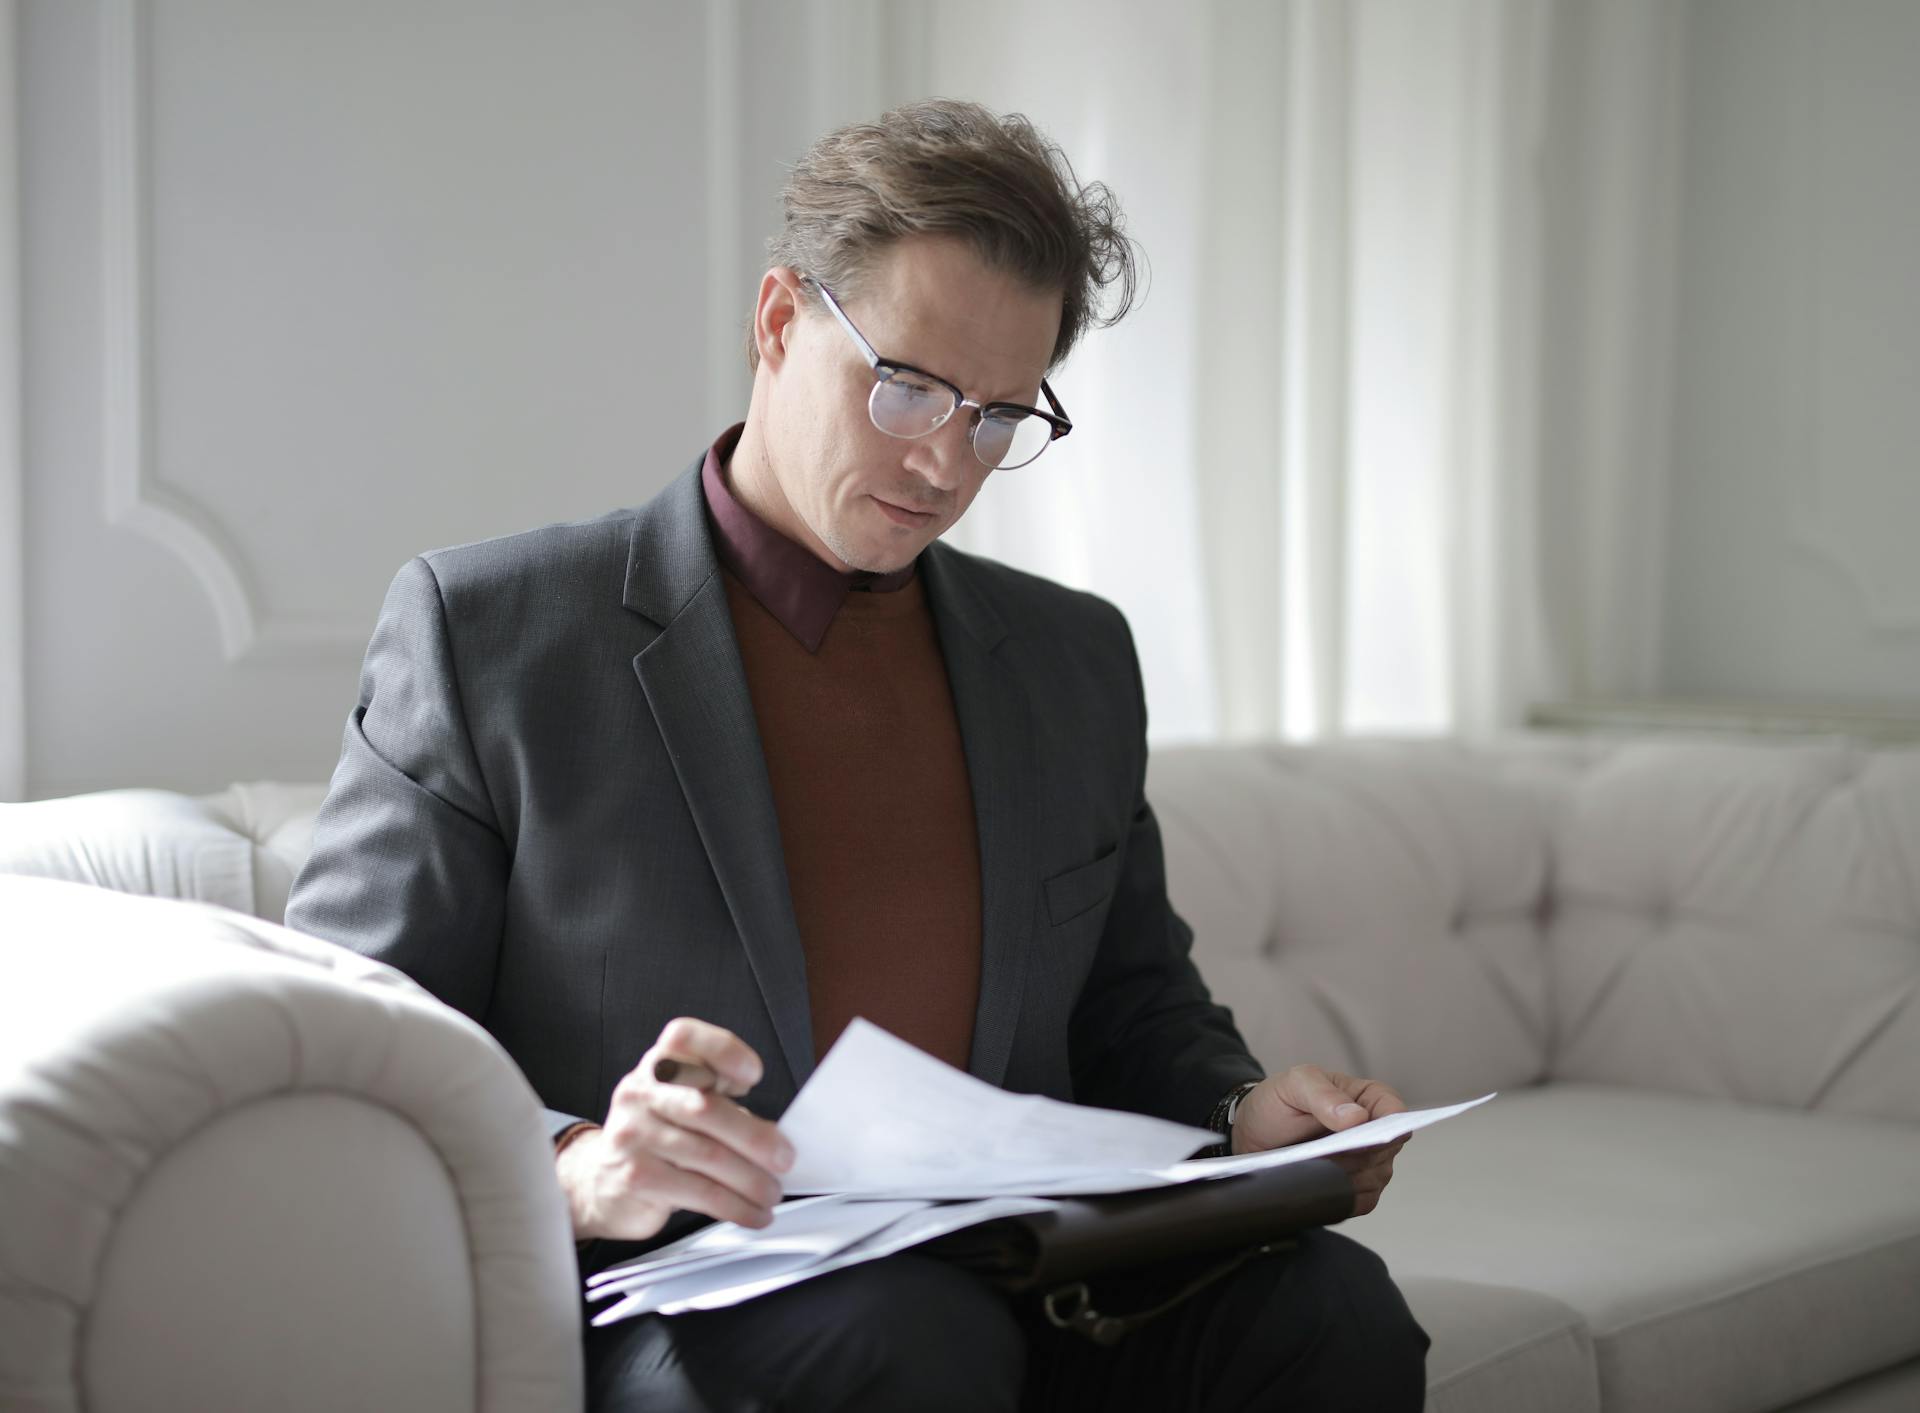 A man going through important documents while sitting on a couch | Source: Pexels